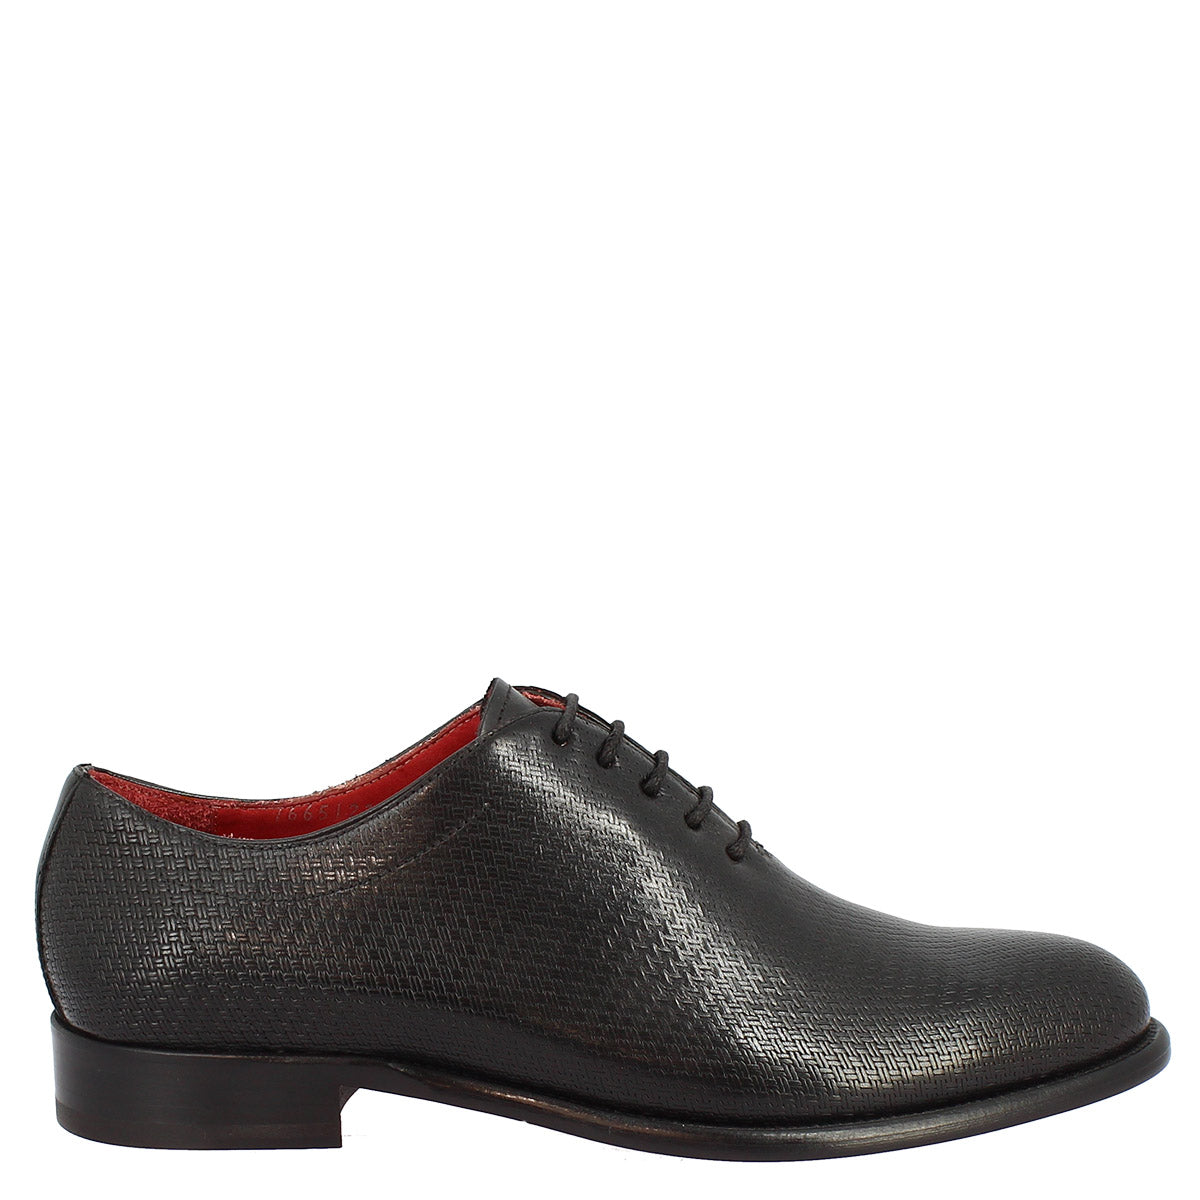 Men's handmade round toe brogues shoes in black Montecarlo calf leather